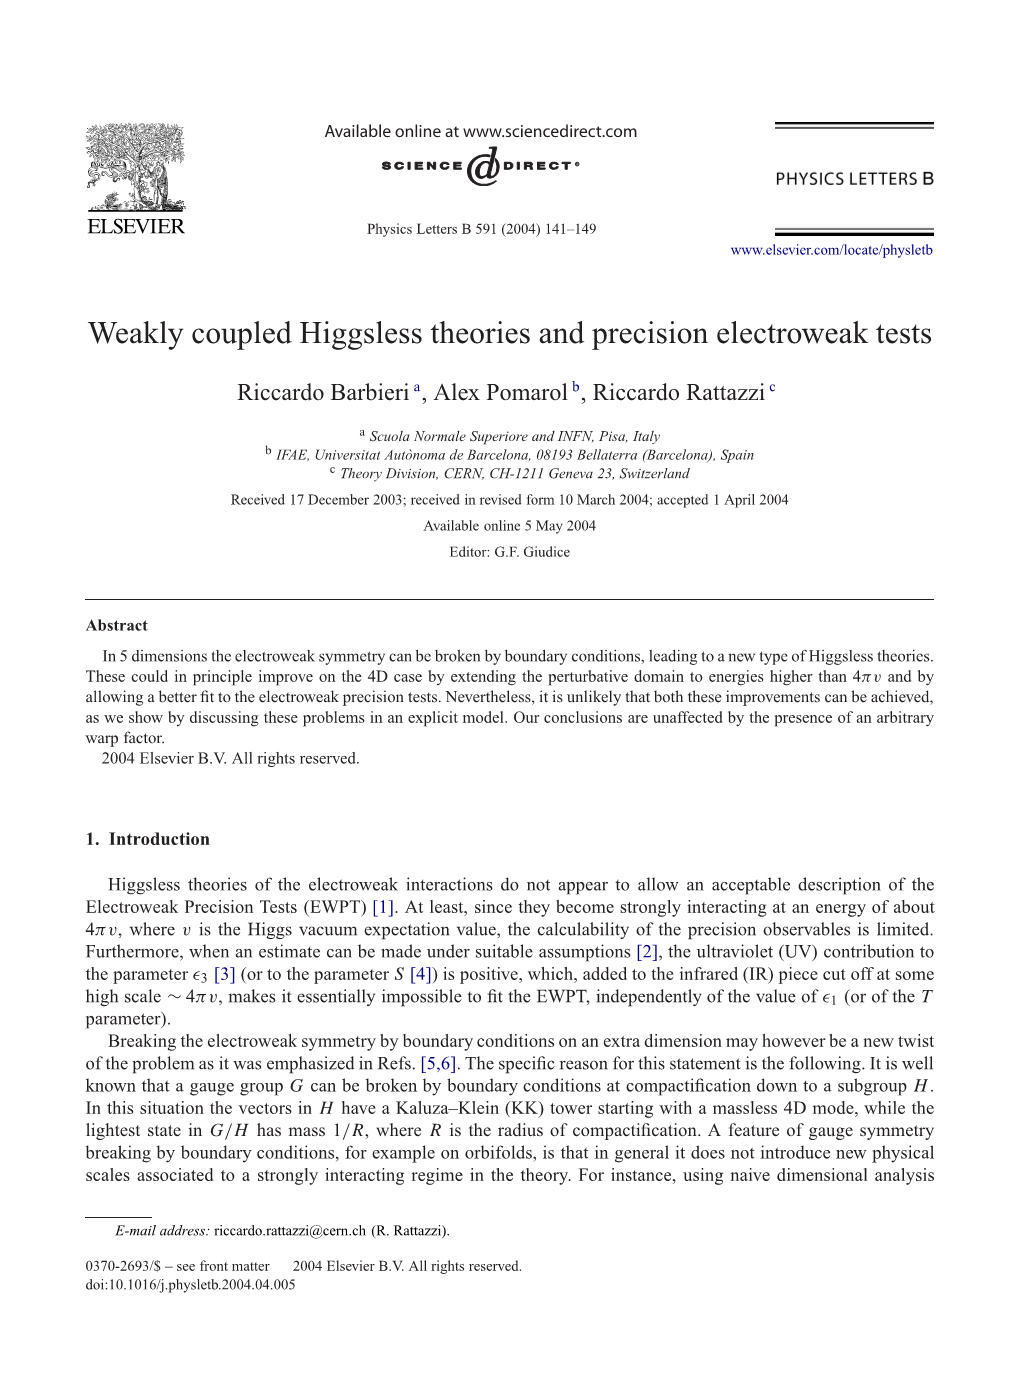 Weakly Coupled Higgsless Theories and Precision Electroweak Tests